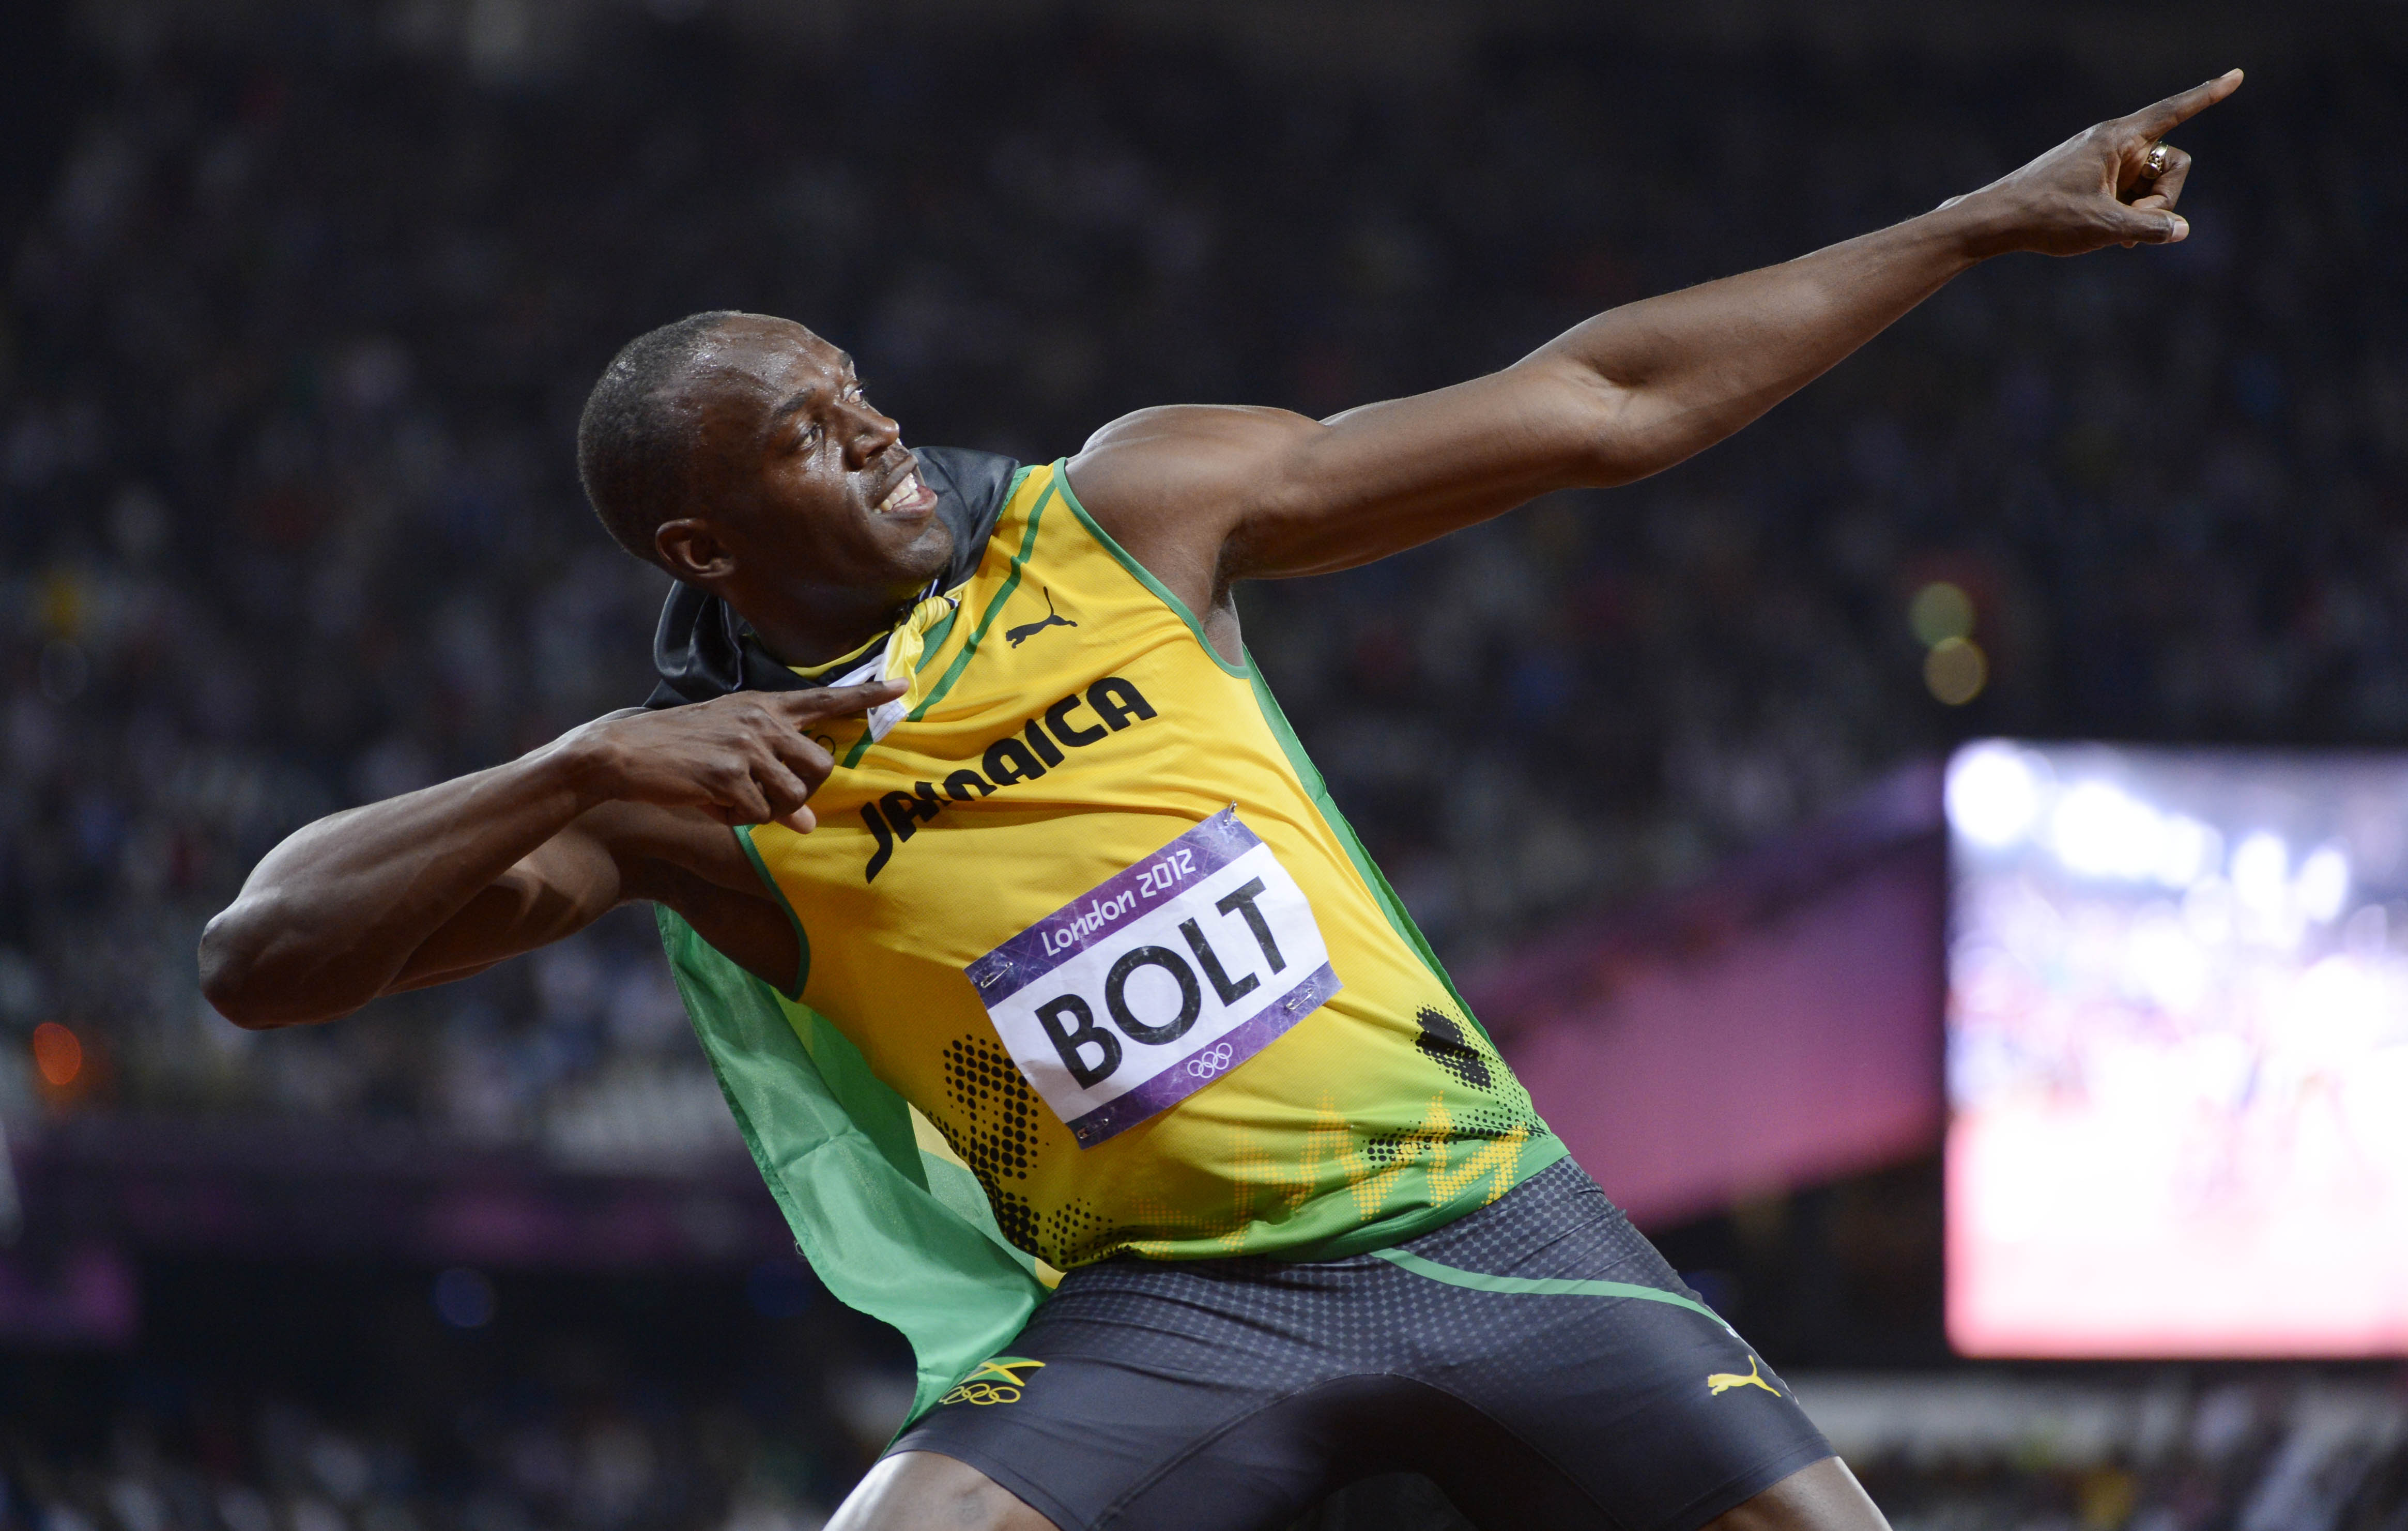 Track icon Usain Bolt files for trademarks to protect his victory pose